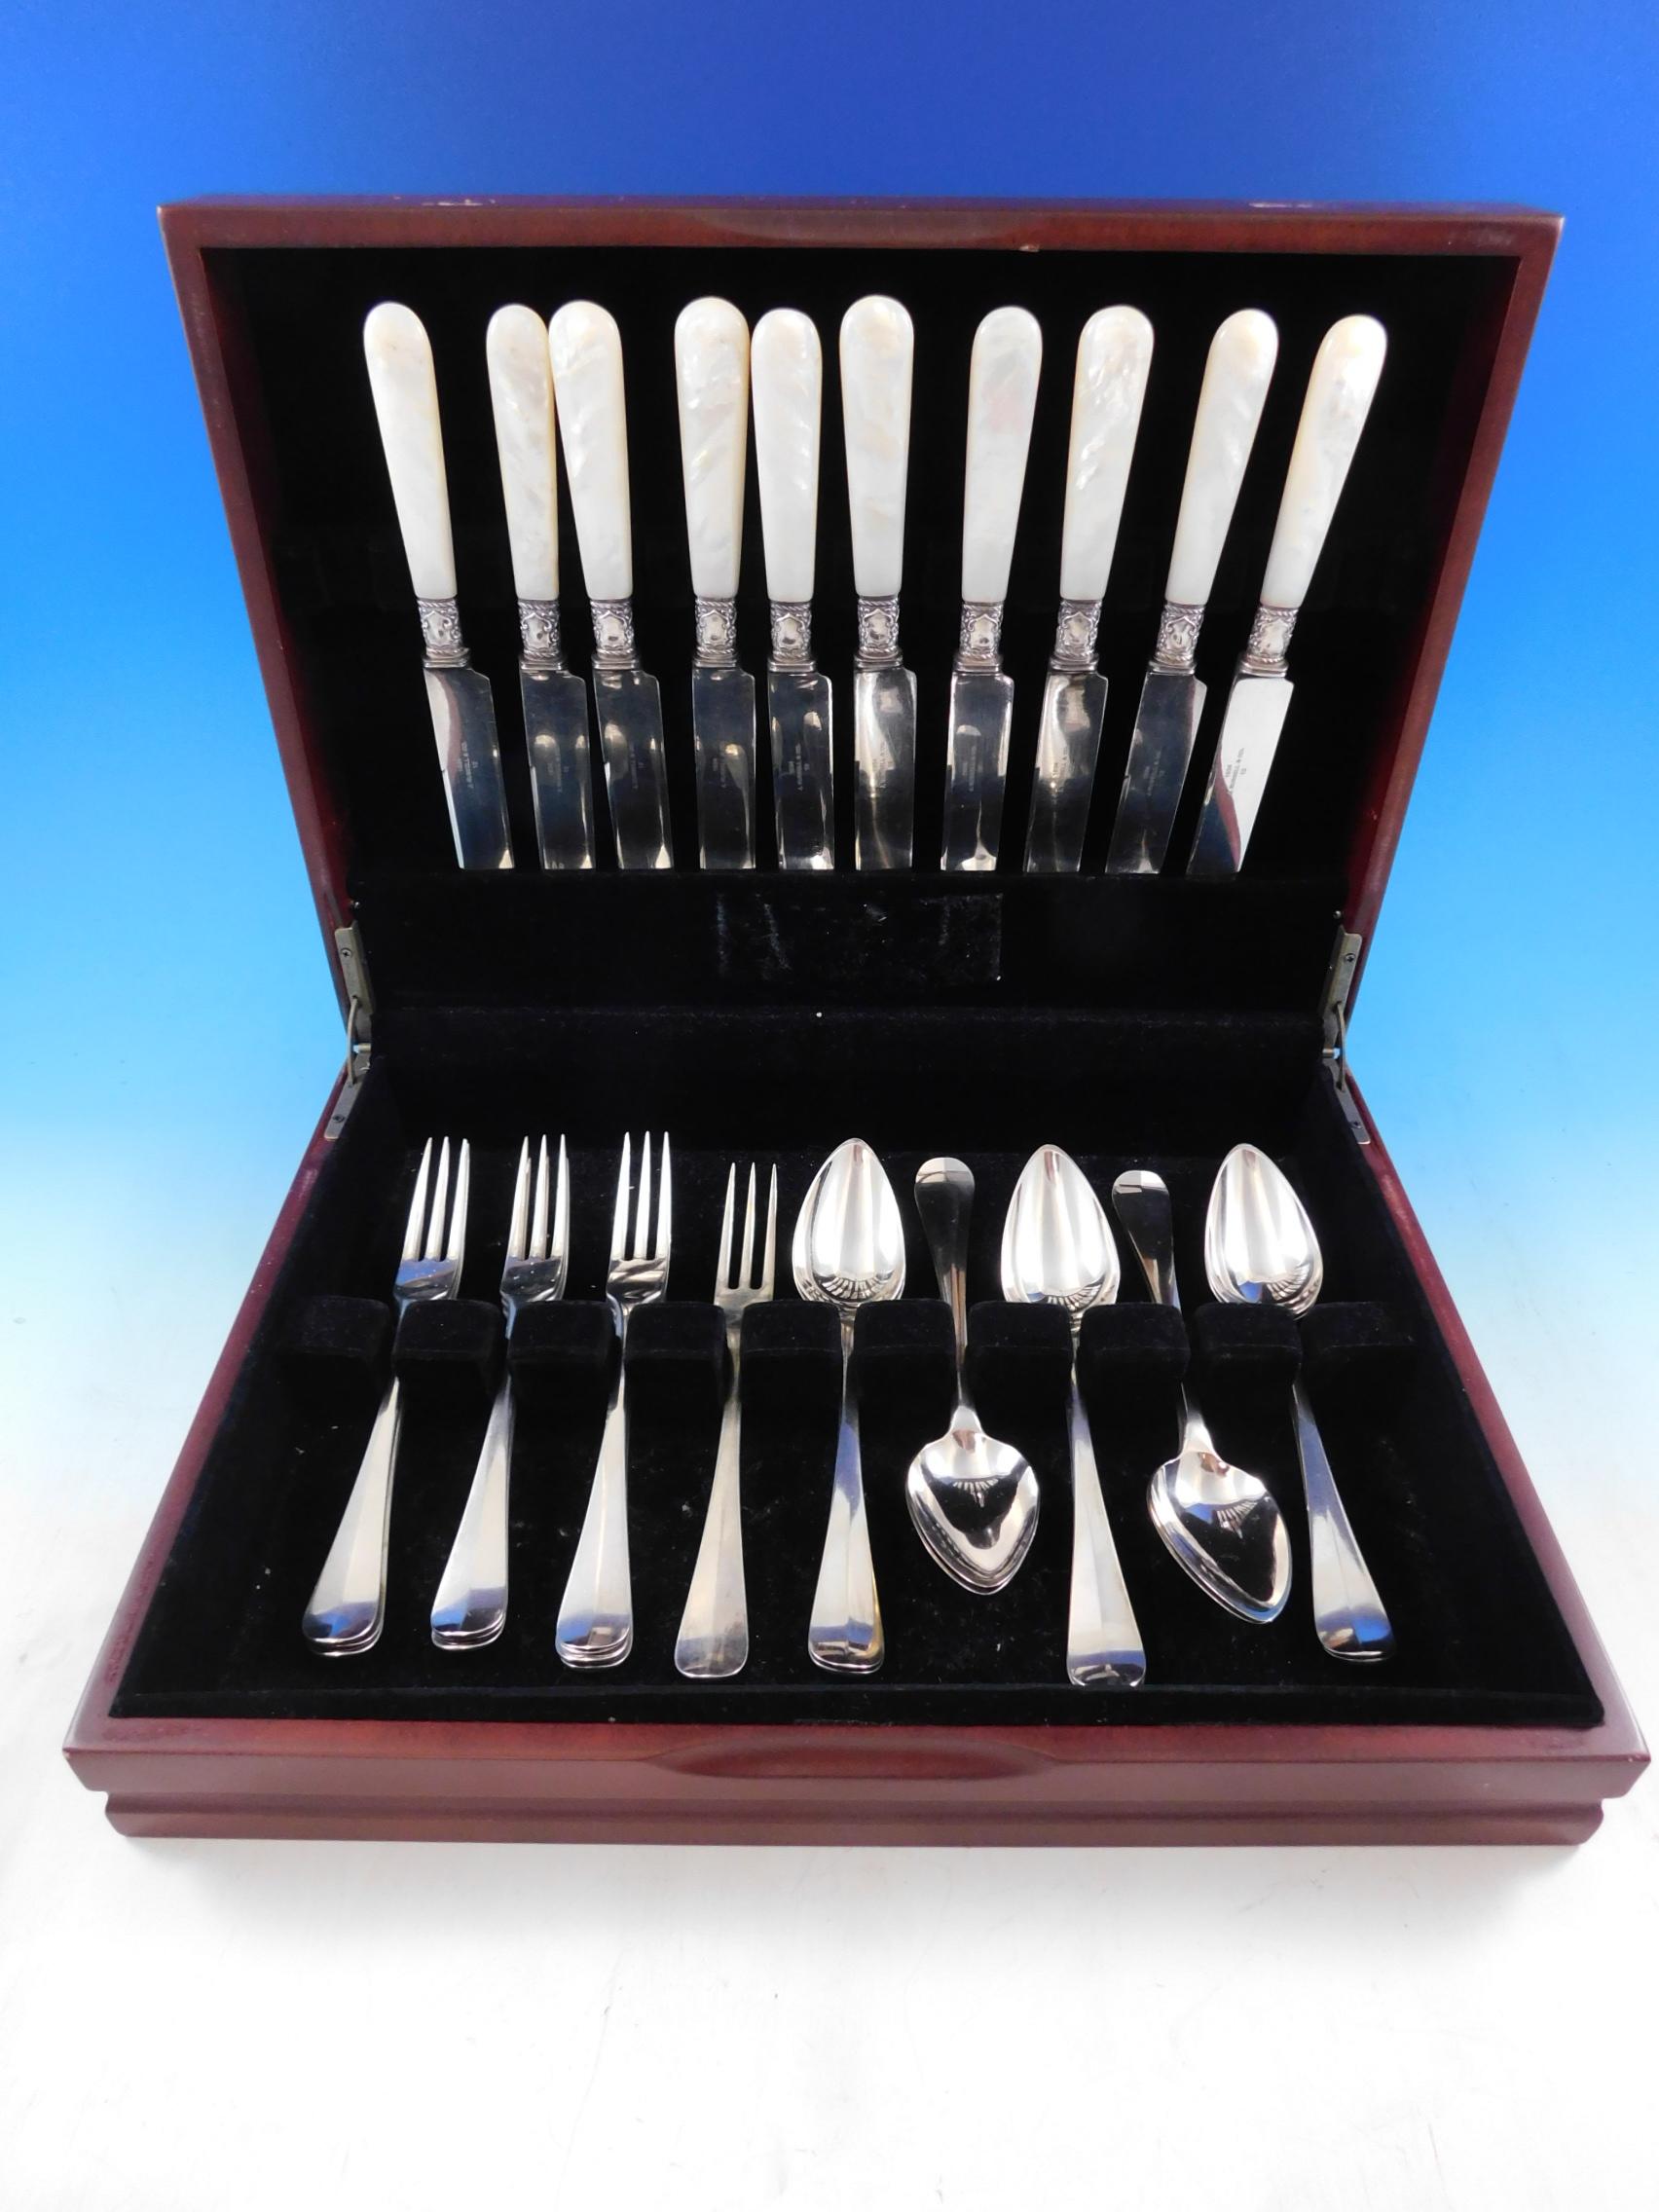 Queen Anne Dutch .833 silver dessert flatware set, 20 pieces plus 10 Mother of Pearl handle knives with sterling ferrules. This set includes:

10 knives w/ mother of pearl handles, 8 5/8